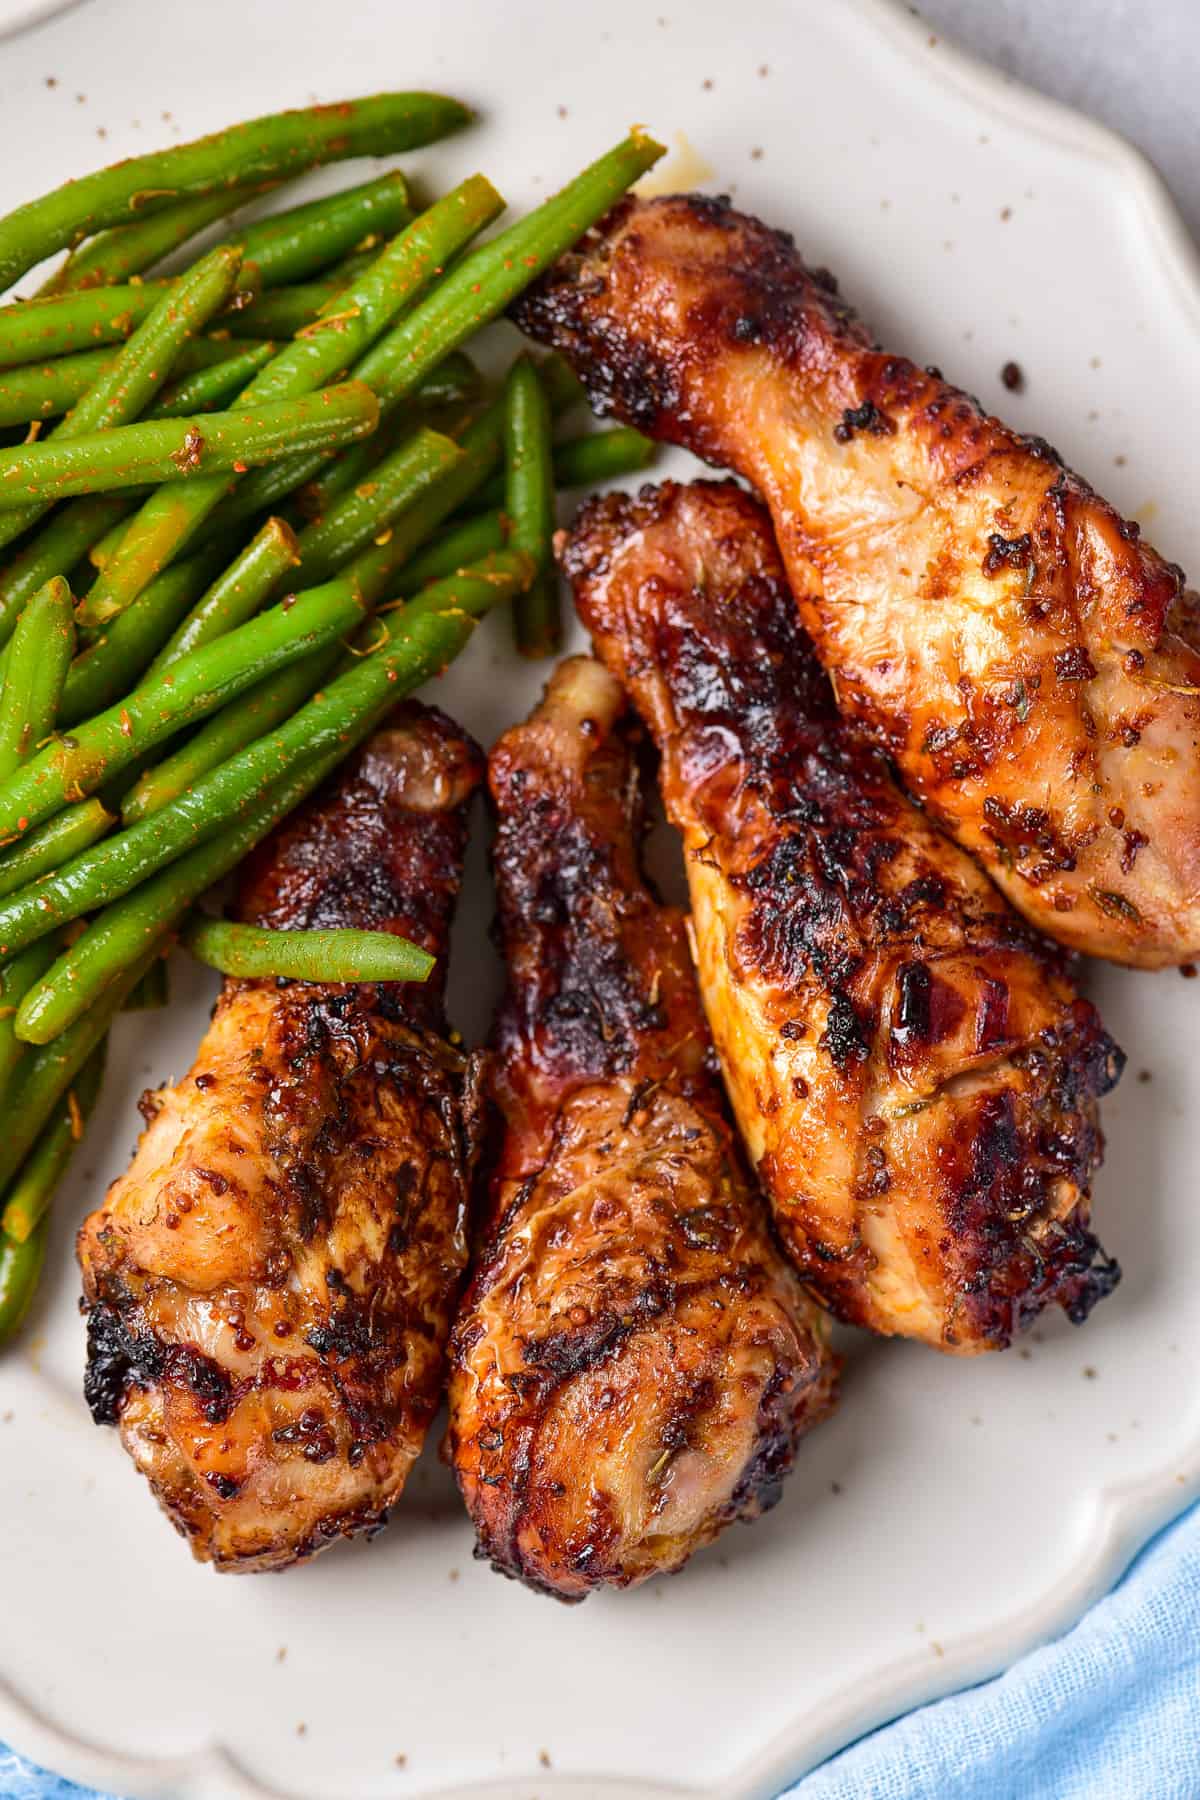 Baked chicken legs on a plate with green beans.